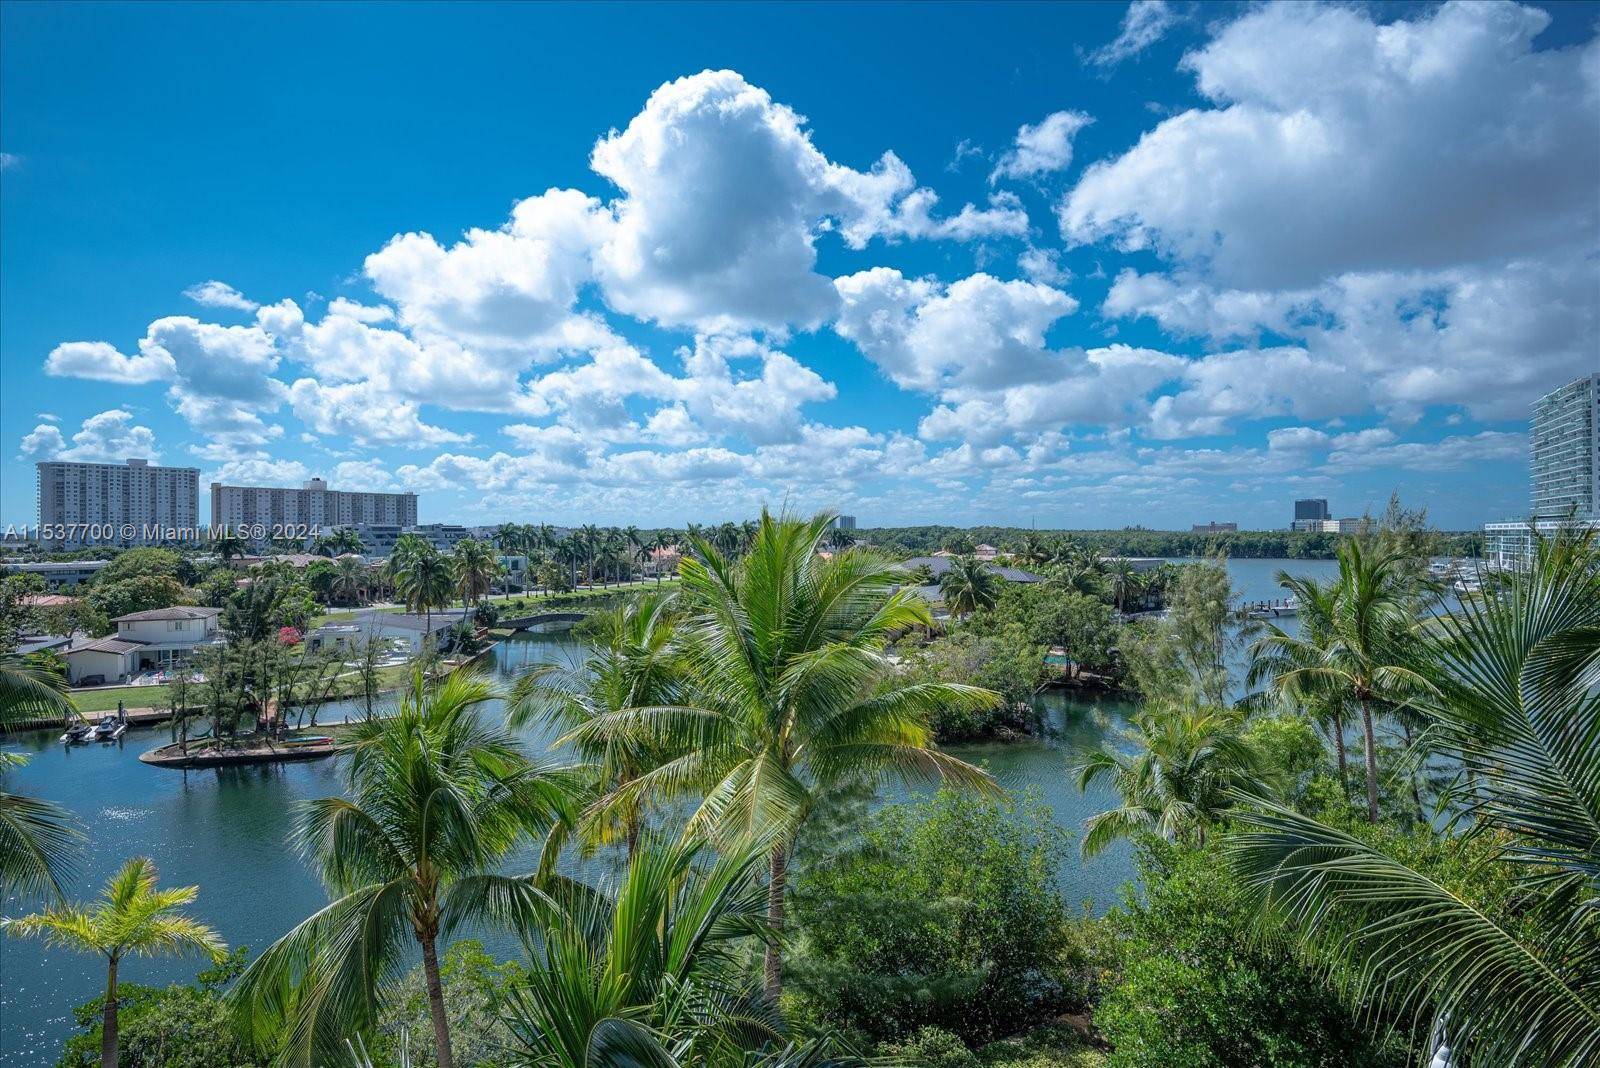 Step Inside This Spacious 3BR 3BA Condo Rental Located on the 4th Floor In The Oceania 5, Perfectly Situated Right Above the Palm Trees Horizon to Give that Relaxed Tranquility ...